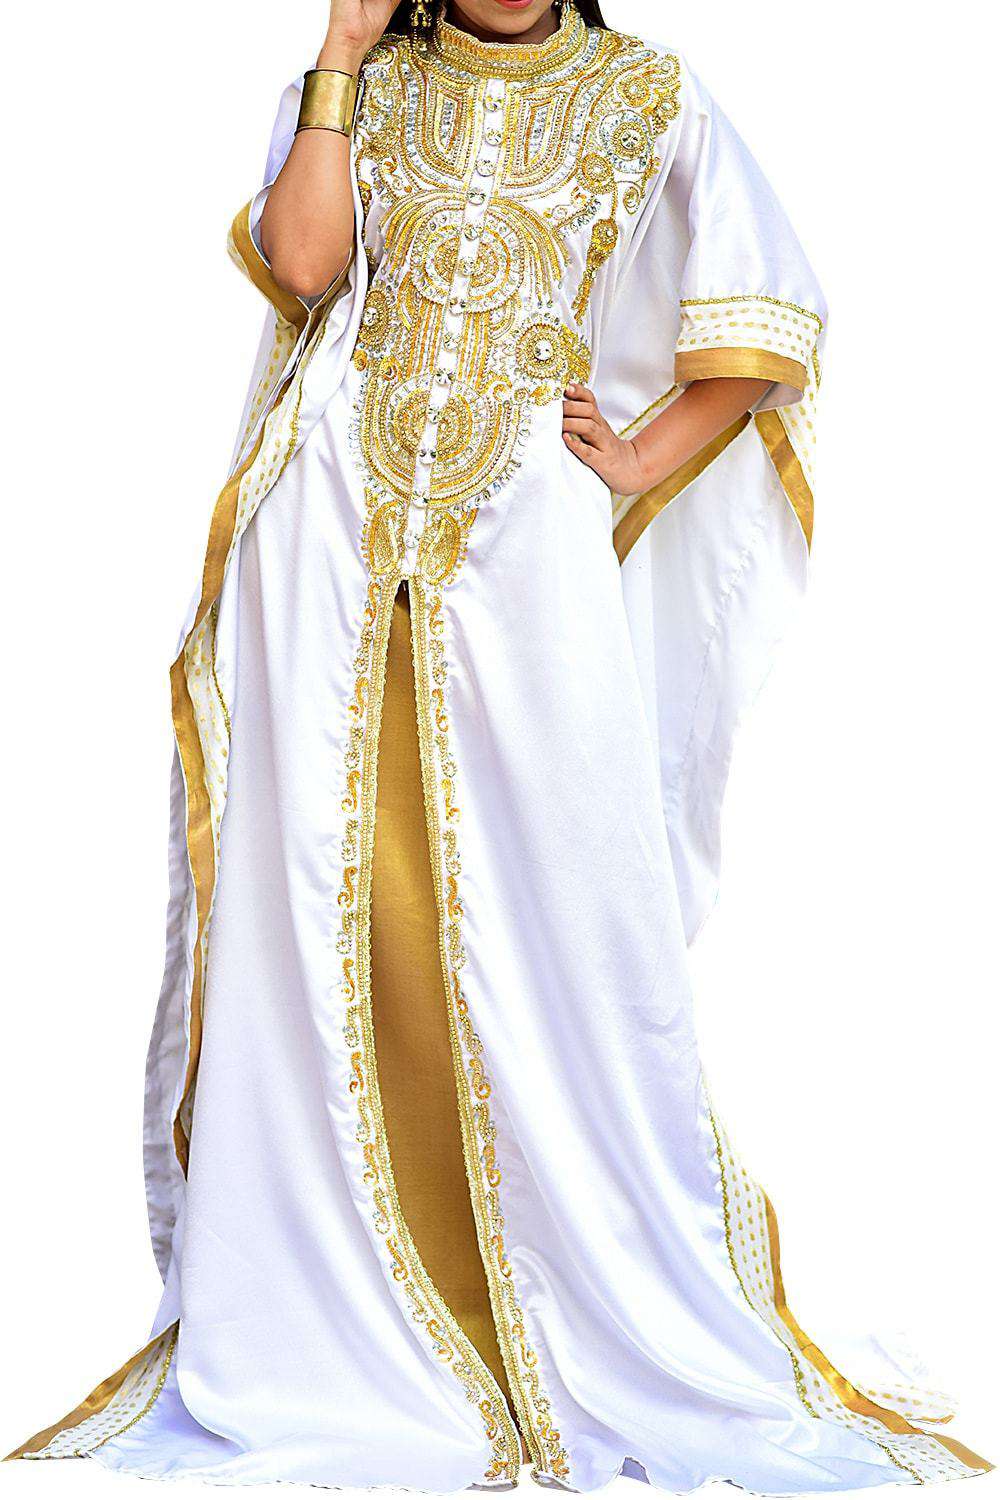 Dazzling White and Gold Color Fashionable Kaftan - One Size